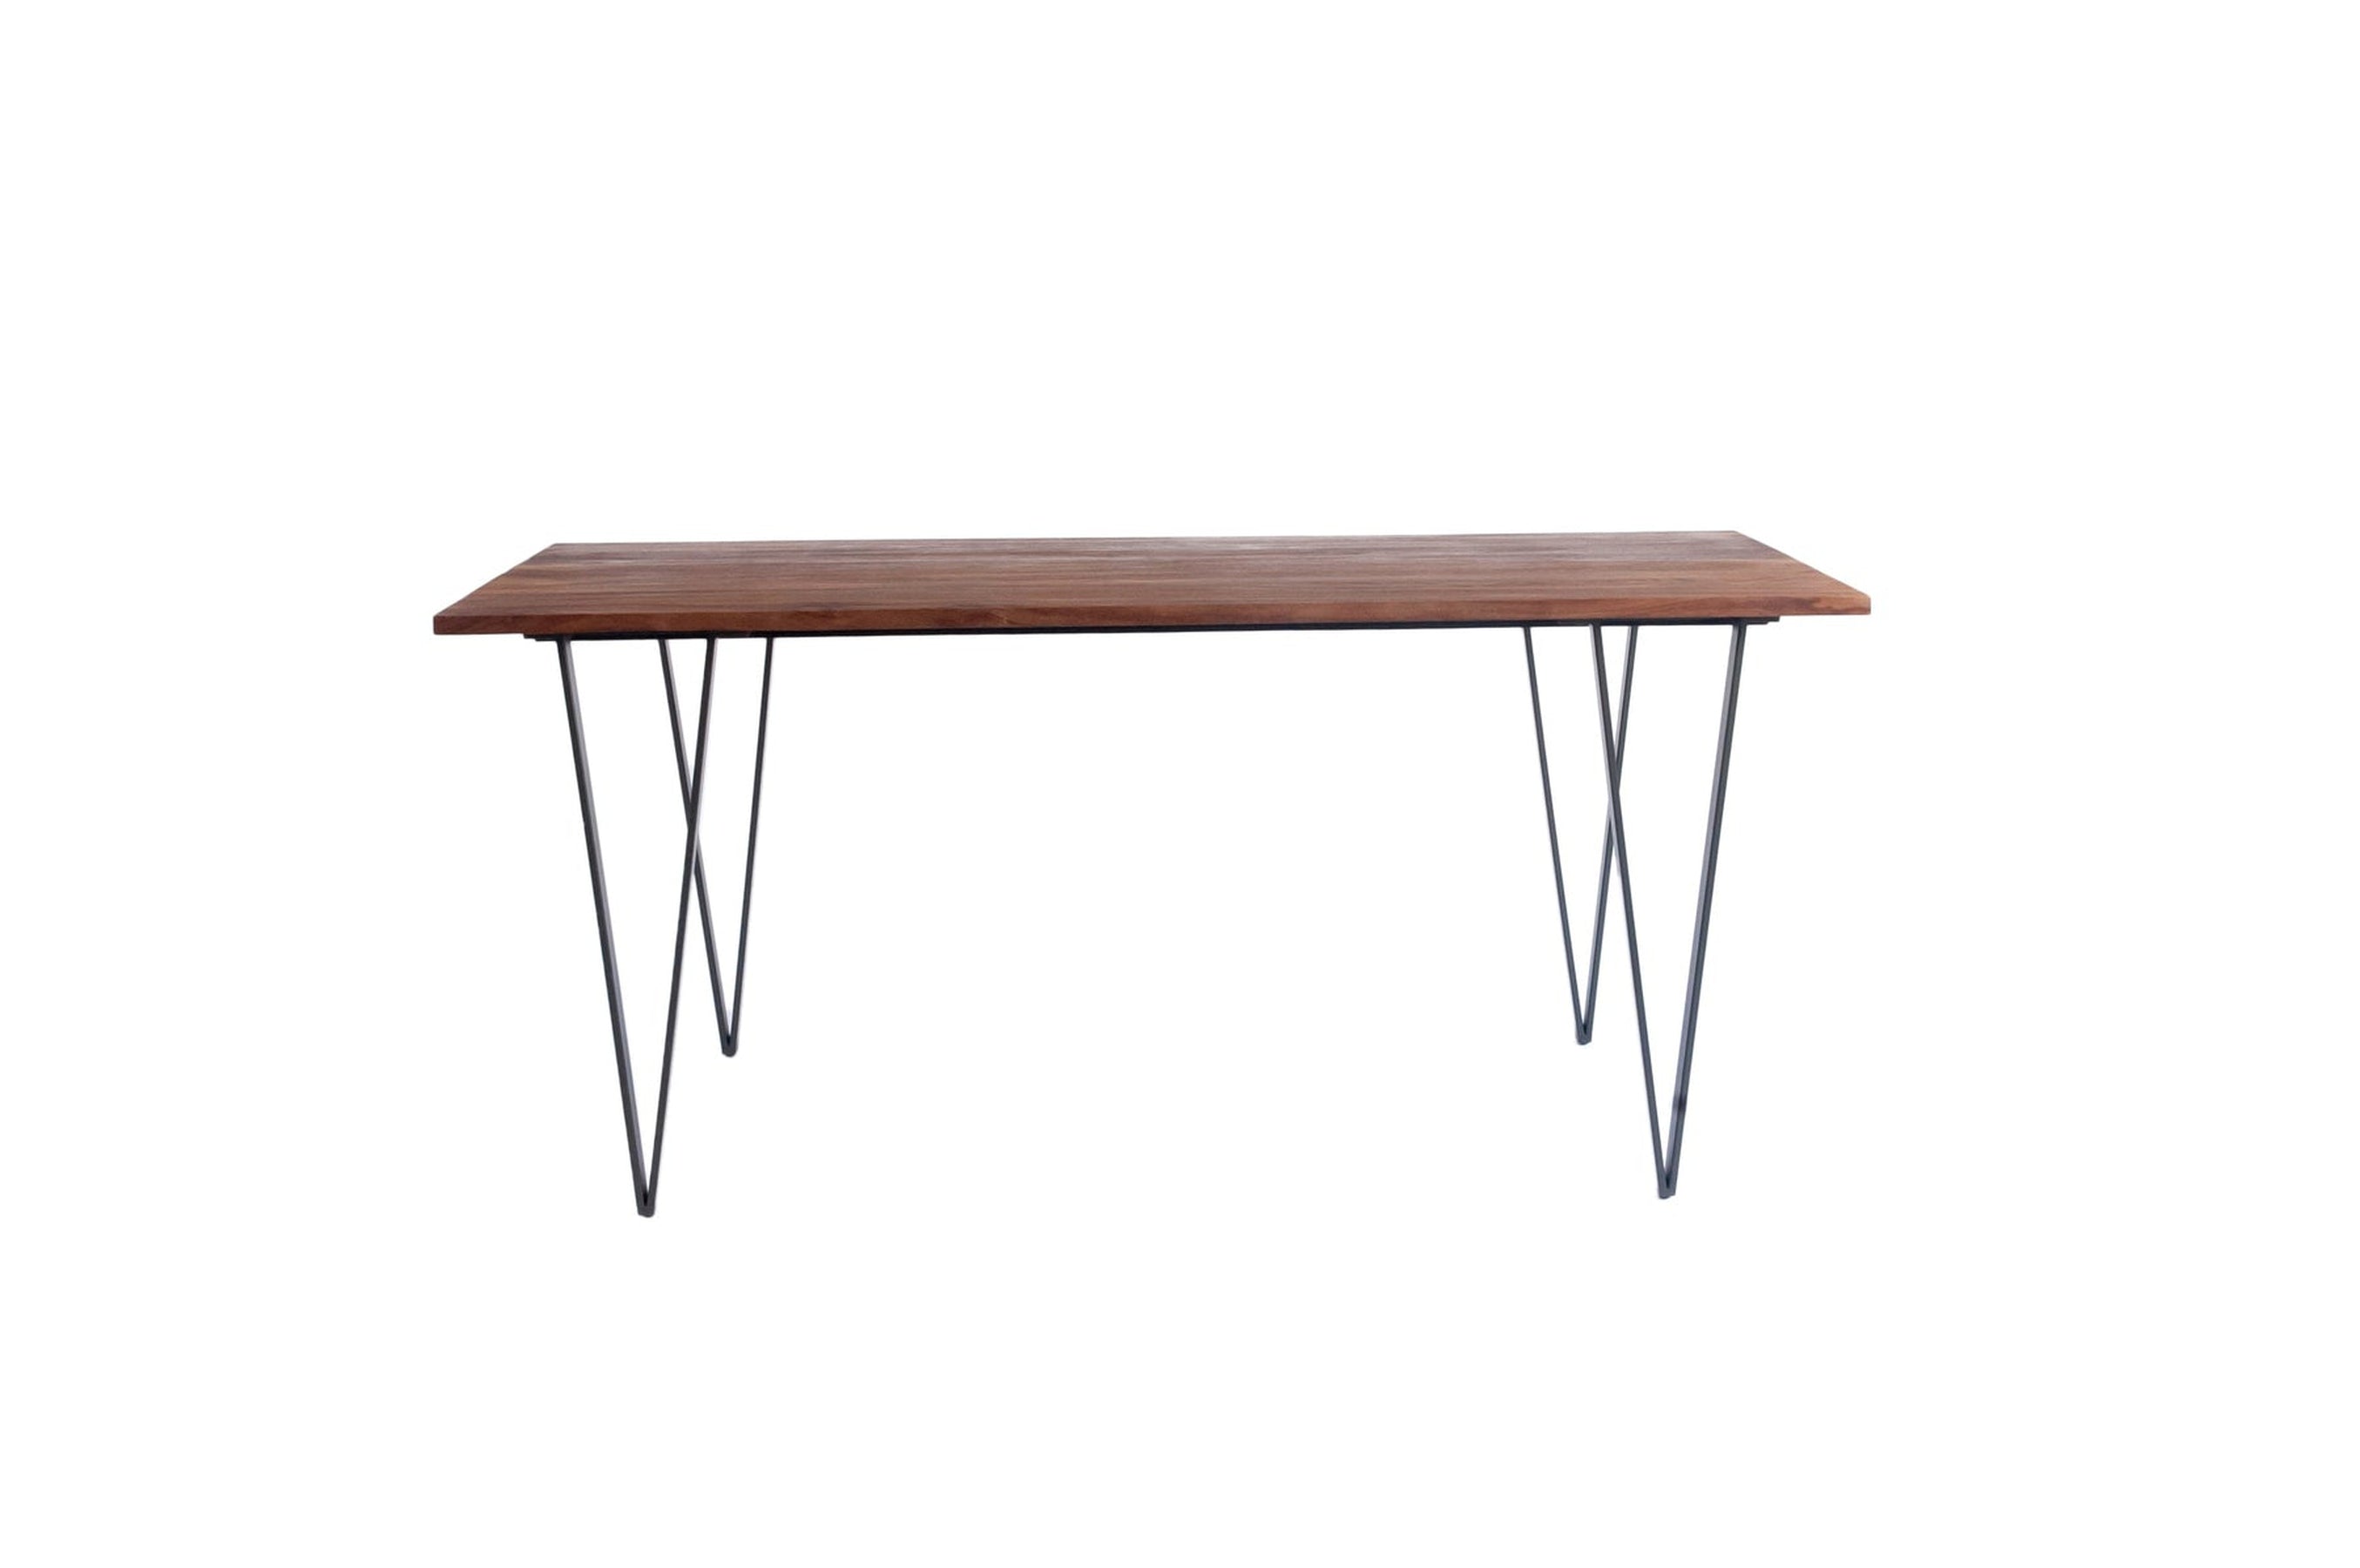 Contemporary Dining Table | Wooden Table with Black Iron Legs | Natural Wood Table for Dining Room | 175x90x76 cm